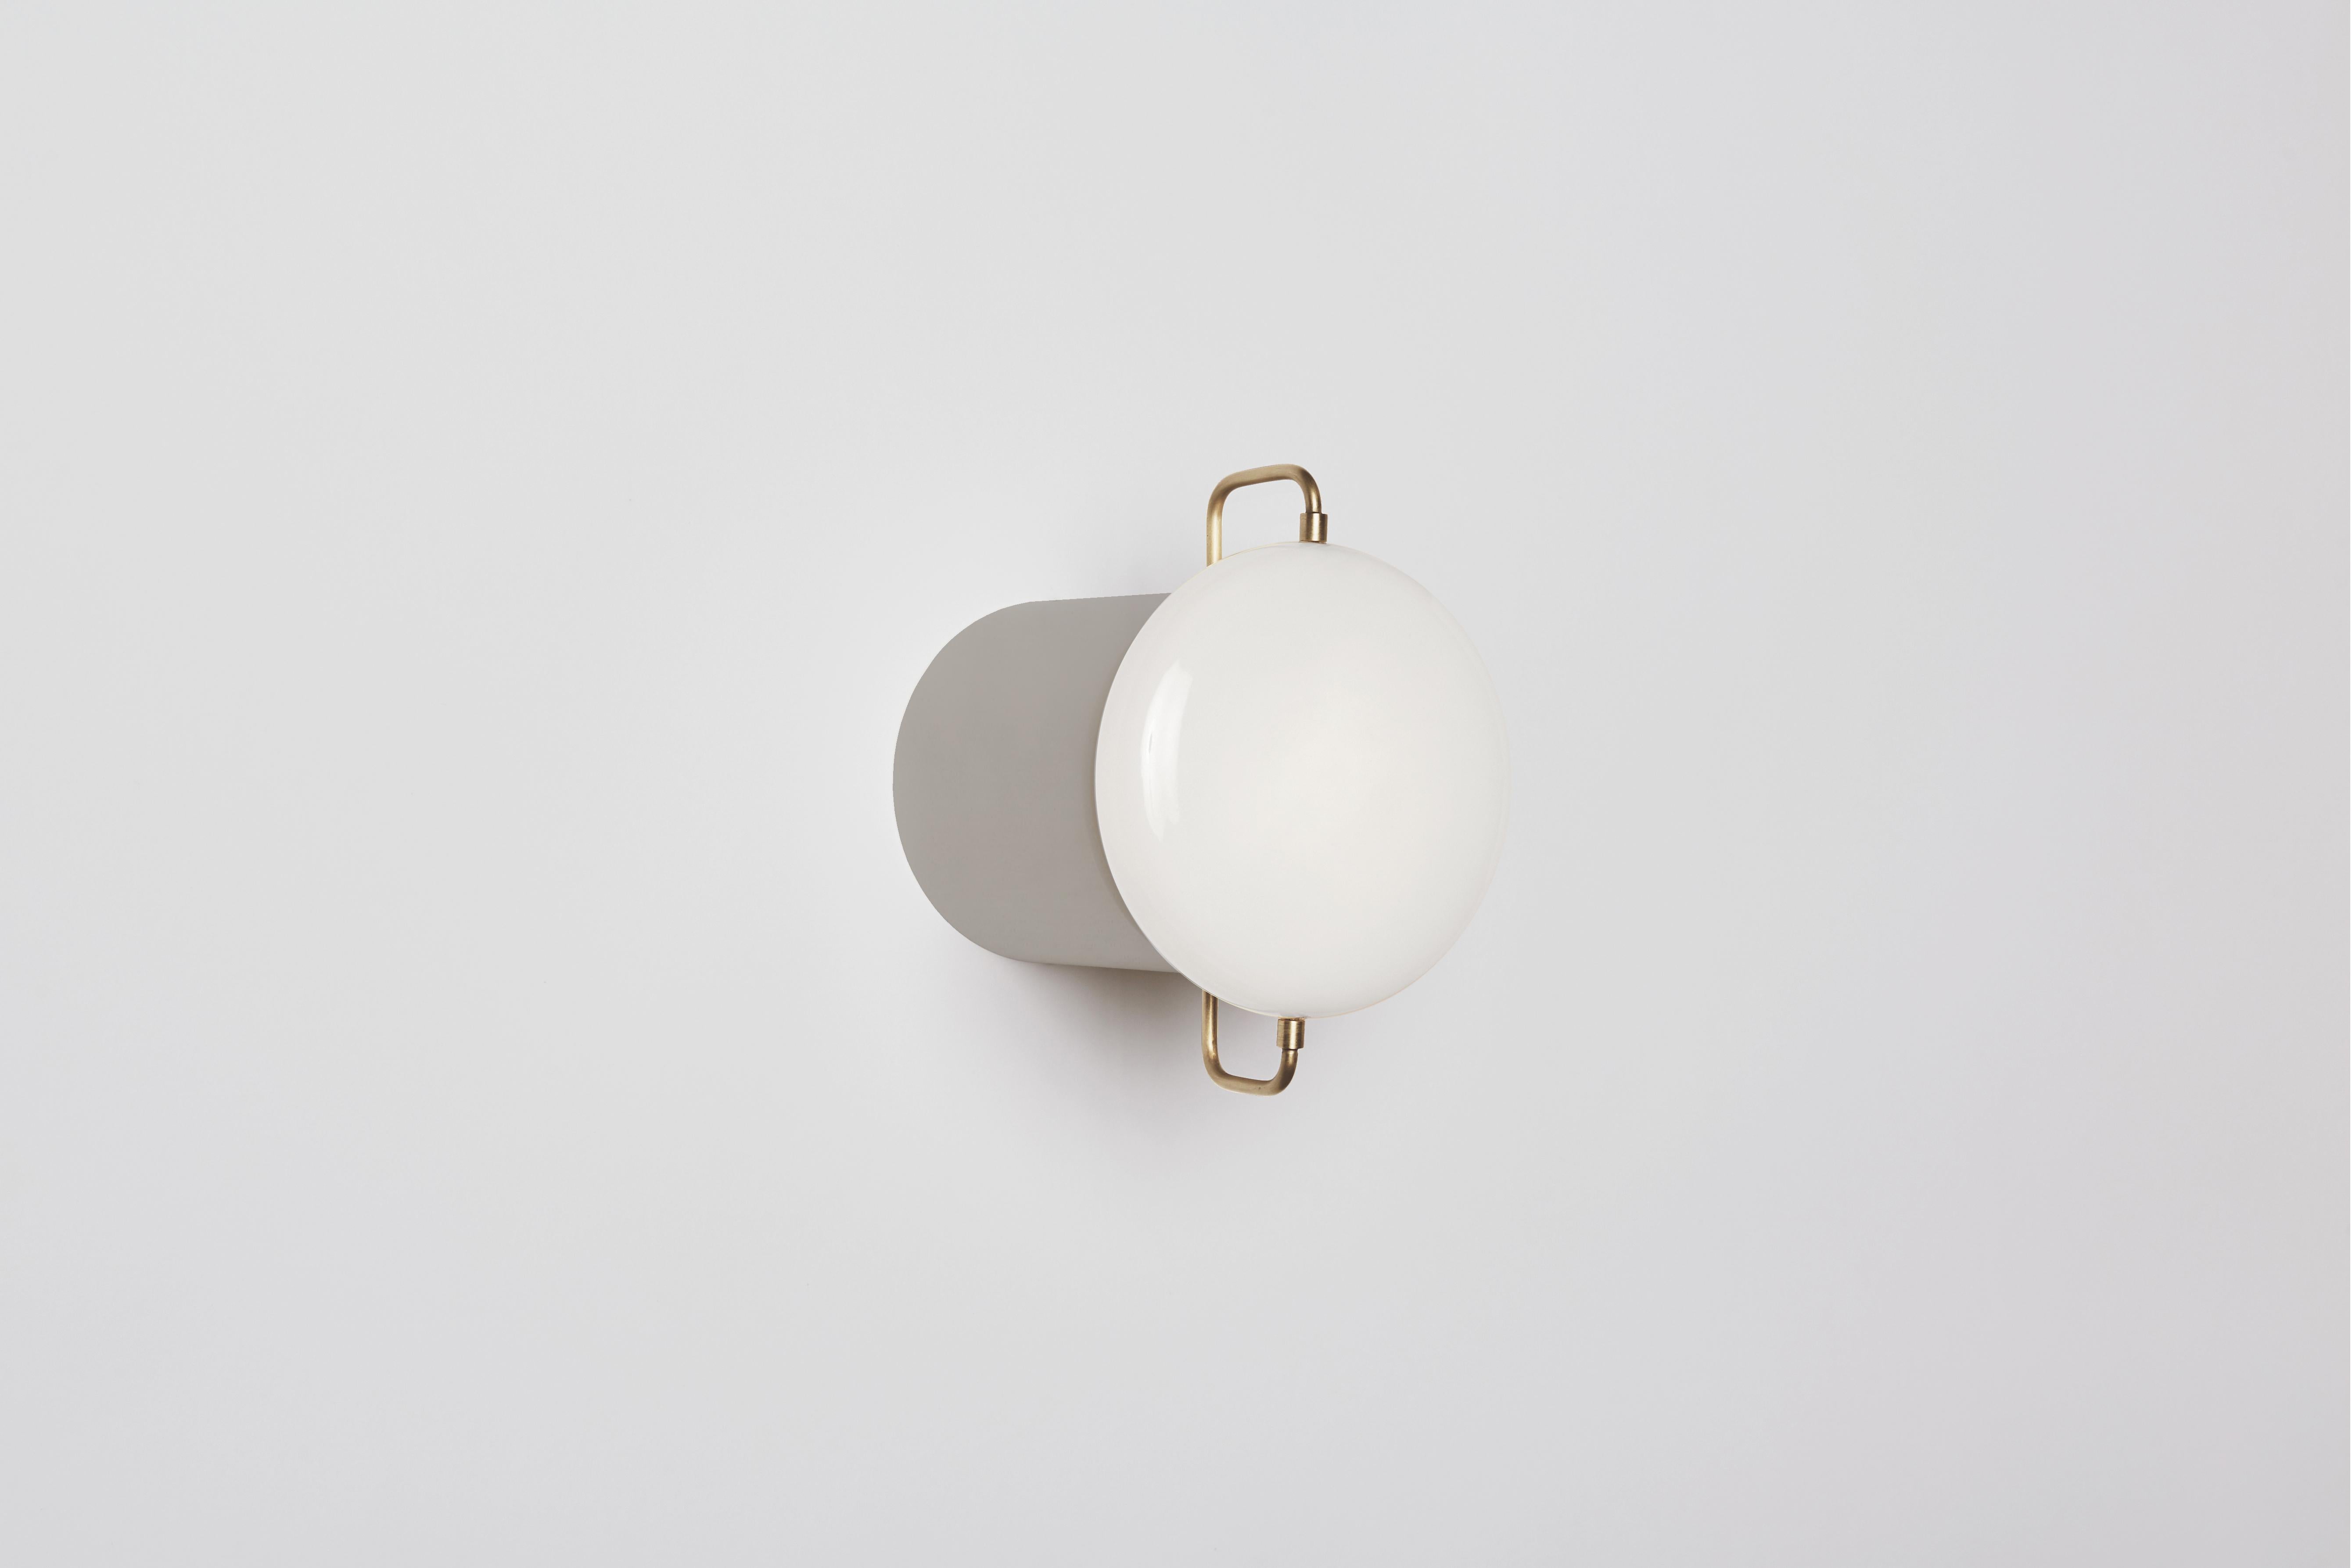 Park I can be utilized as a wall sconce or flush-mount fixture. Referencing porcelain fixtures produced during the pre-war period, the fixture incorporates delicate metal rods that suspend a hand blown milk glass form. Made in the USA, UL listed.